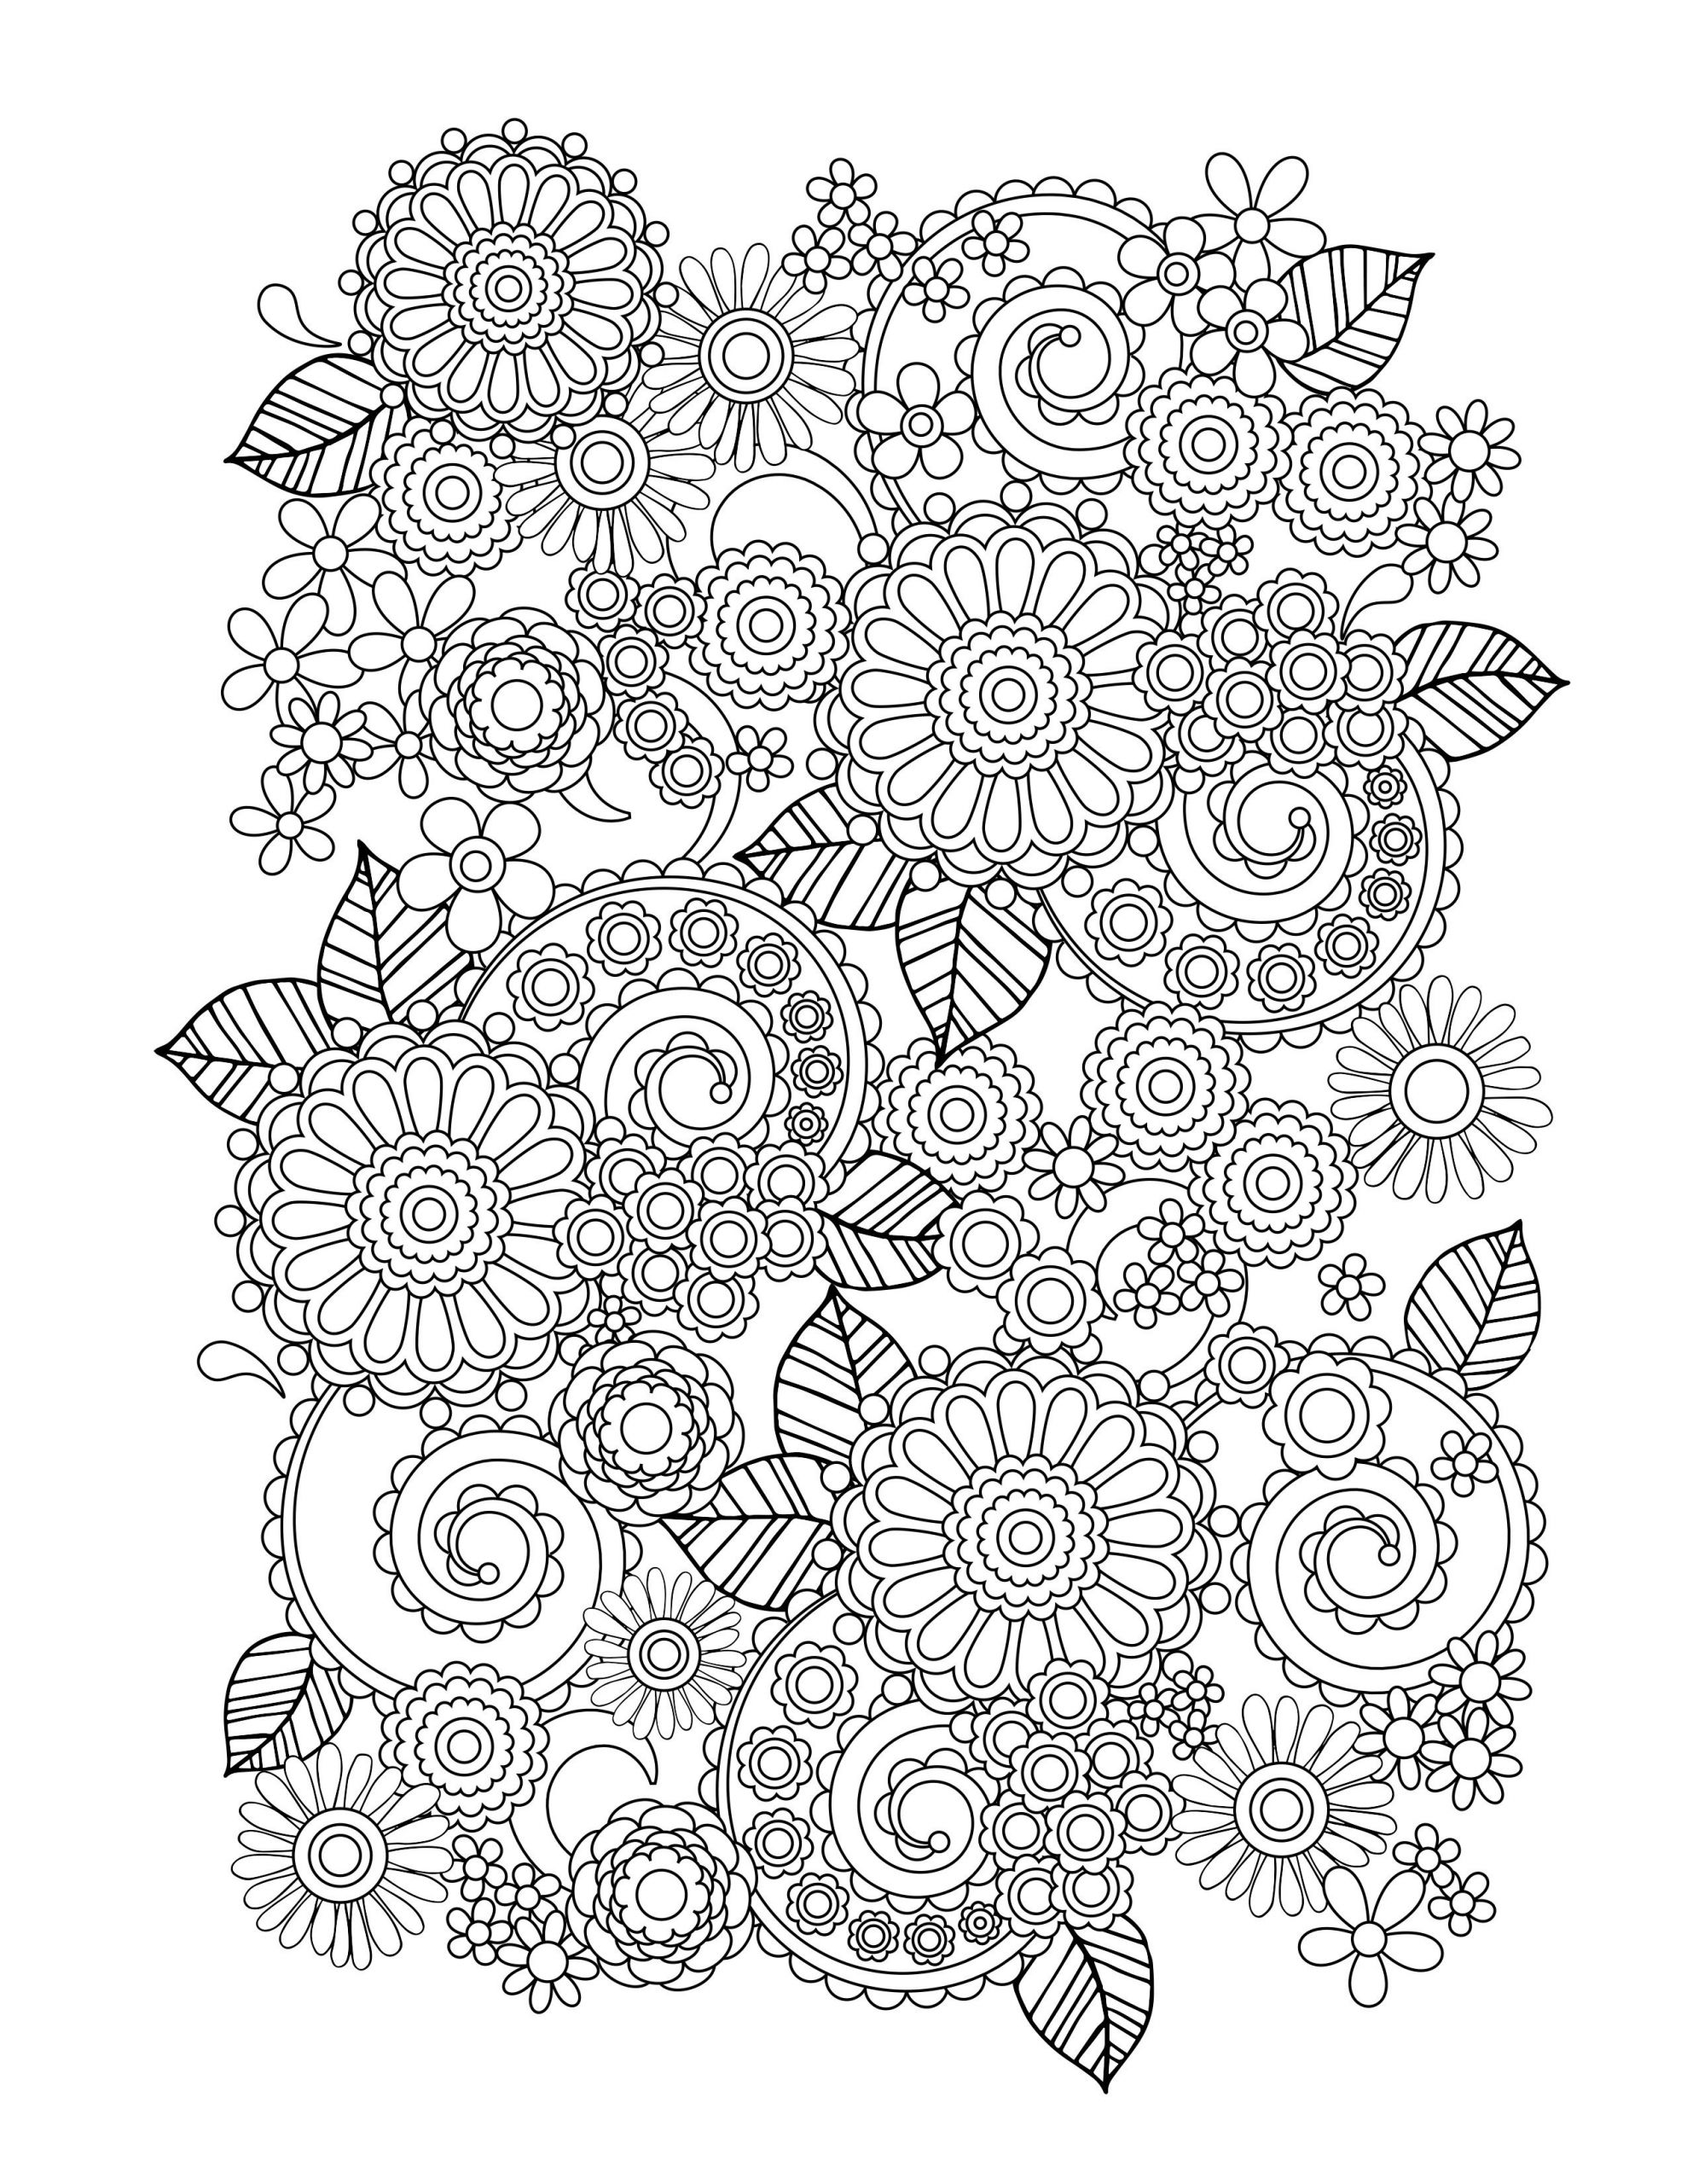 Coloring Sheets For Adults Printable
 Flower Coloring Pages for Adults Best Coloring Pages For